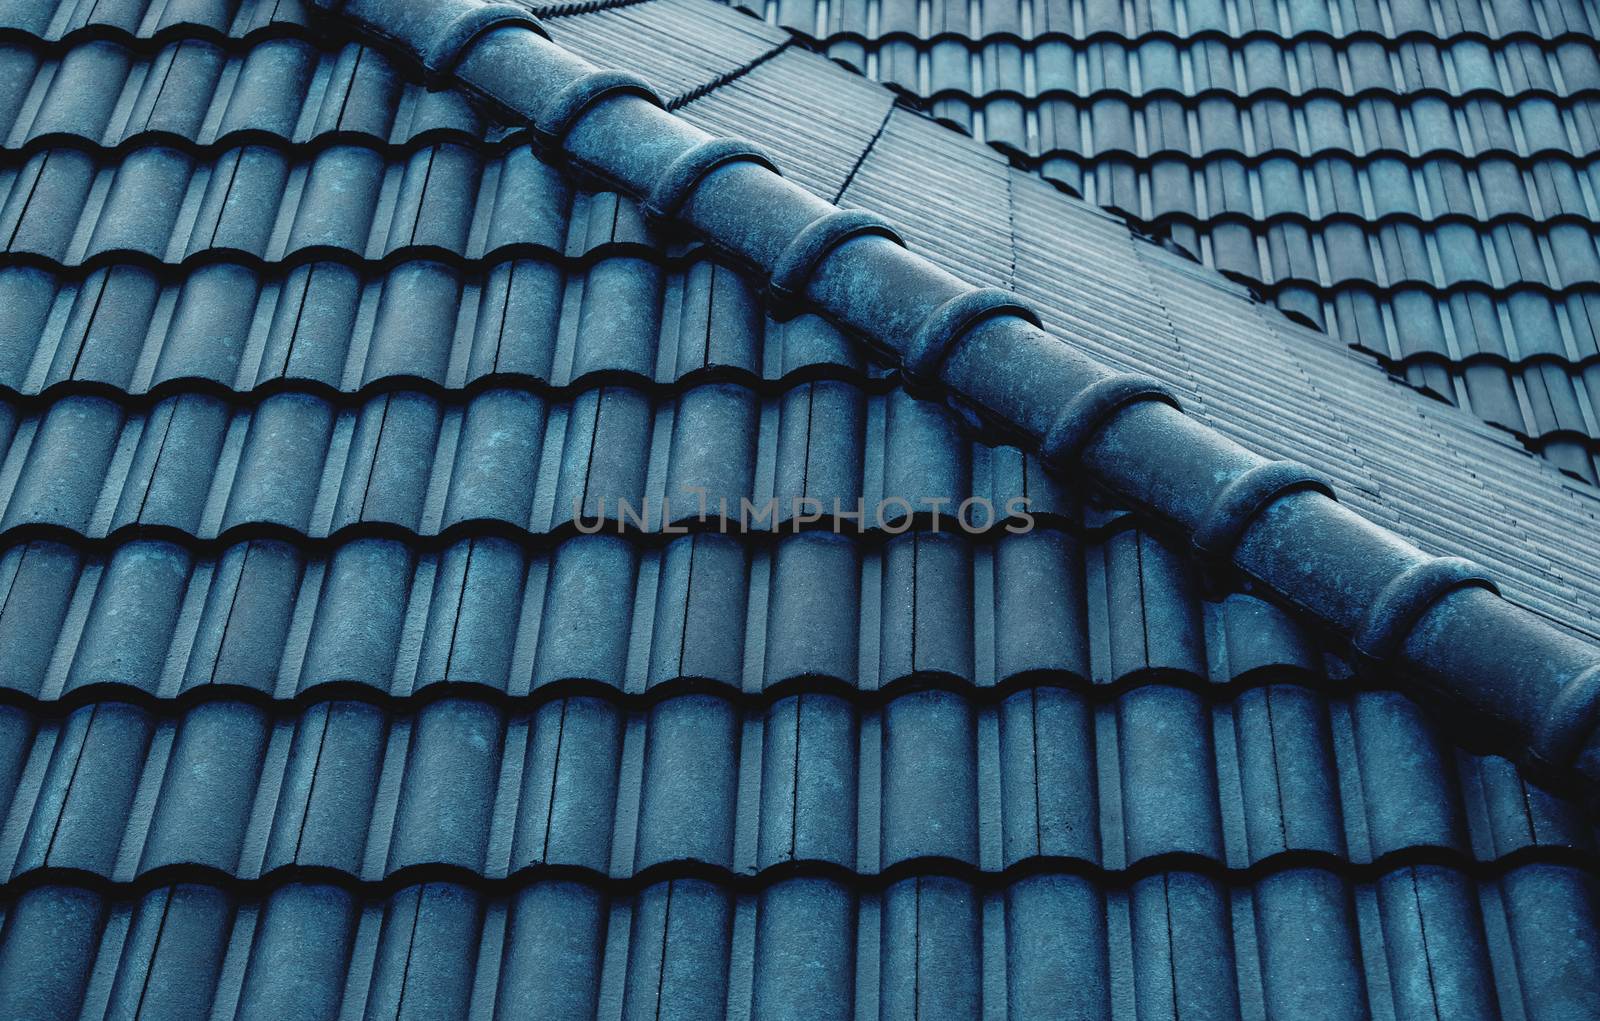 Wet Blue Tiles Roof Pattern. Shot on Rainy Day. Details of Archi by Black-Salmon